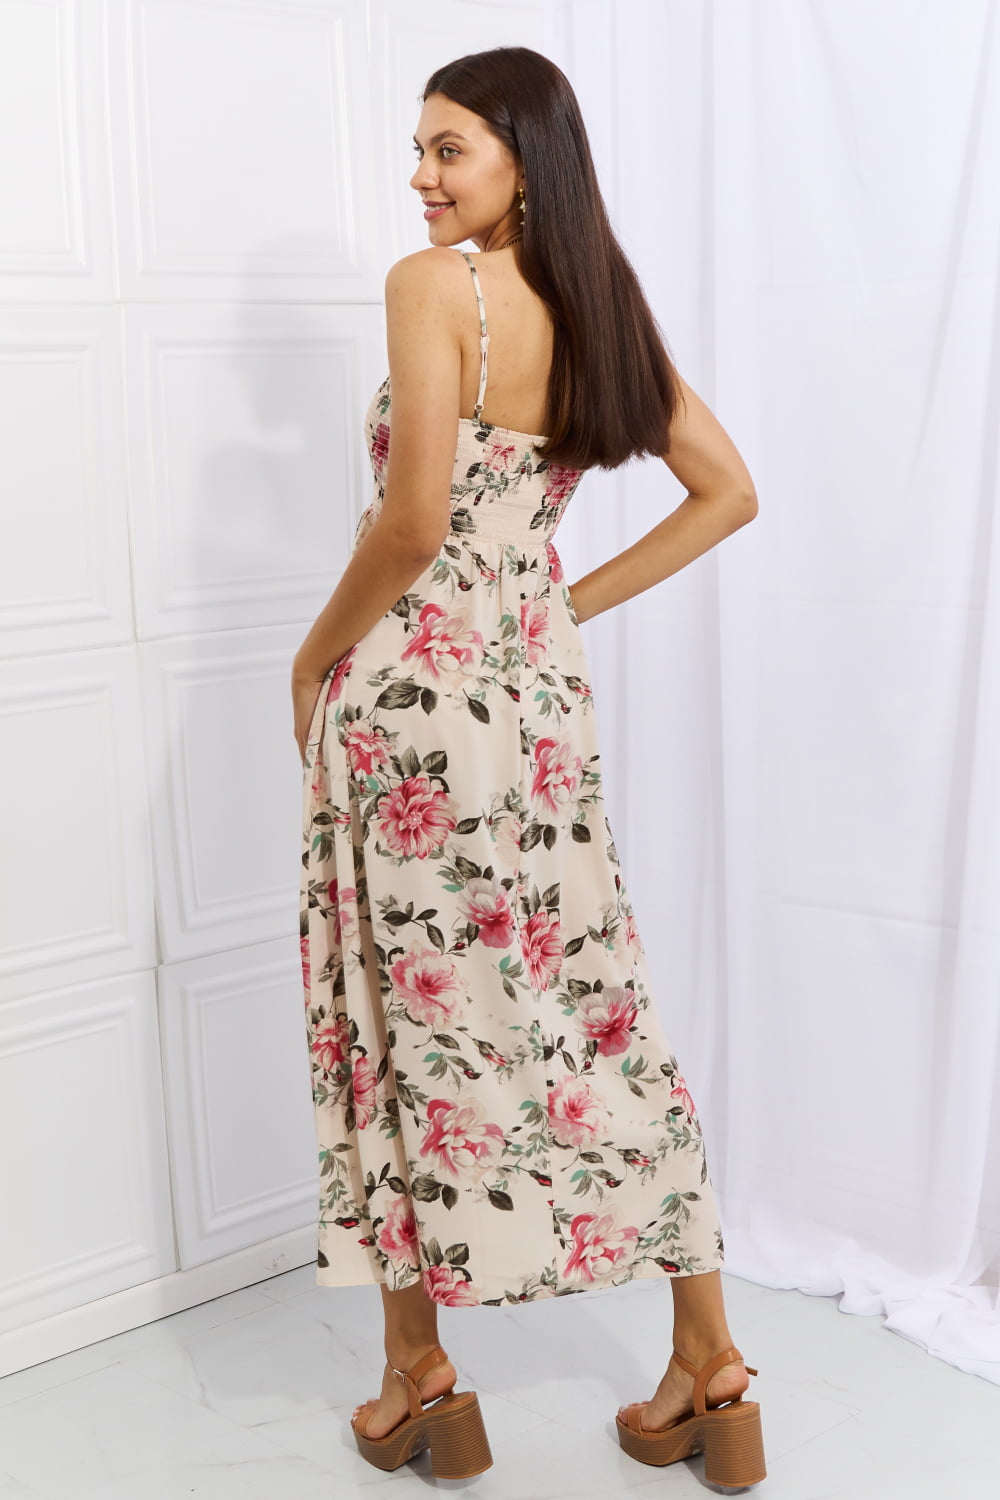 Hazel Blues® |  OneTheLand Hold Me Tight Sleevless Floral Maxi Dress in Pink